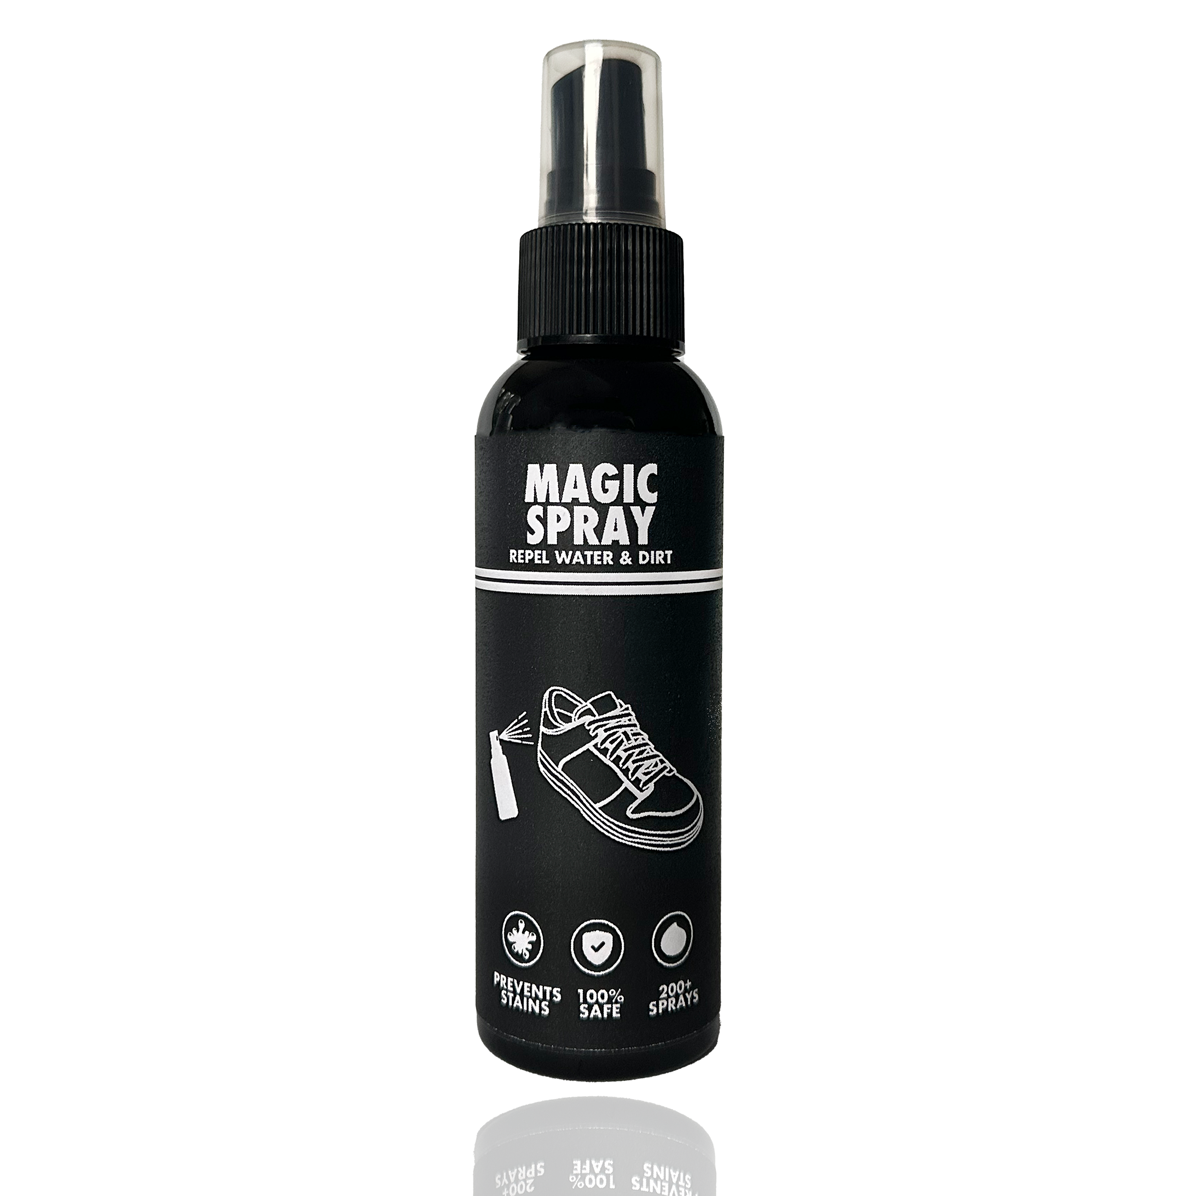 Black spray bottle labeled 'MAGIC SPRAY' for repelling water and dirt.